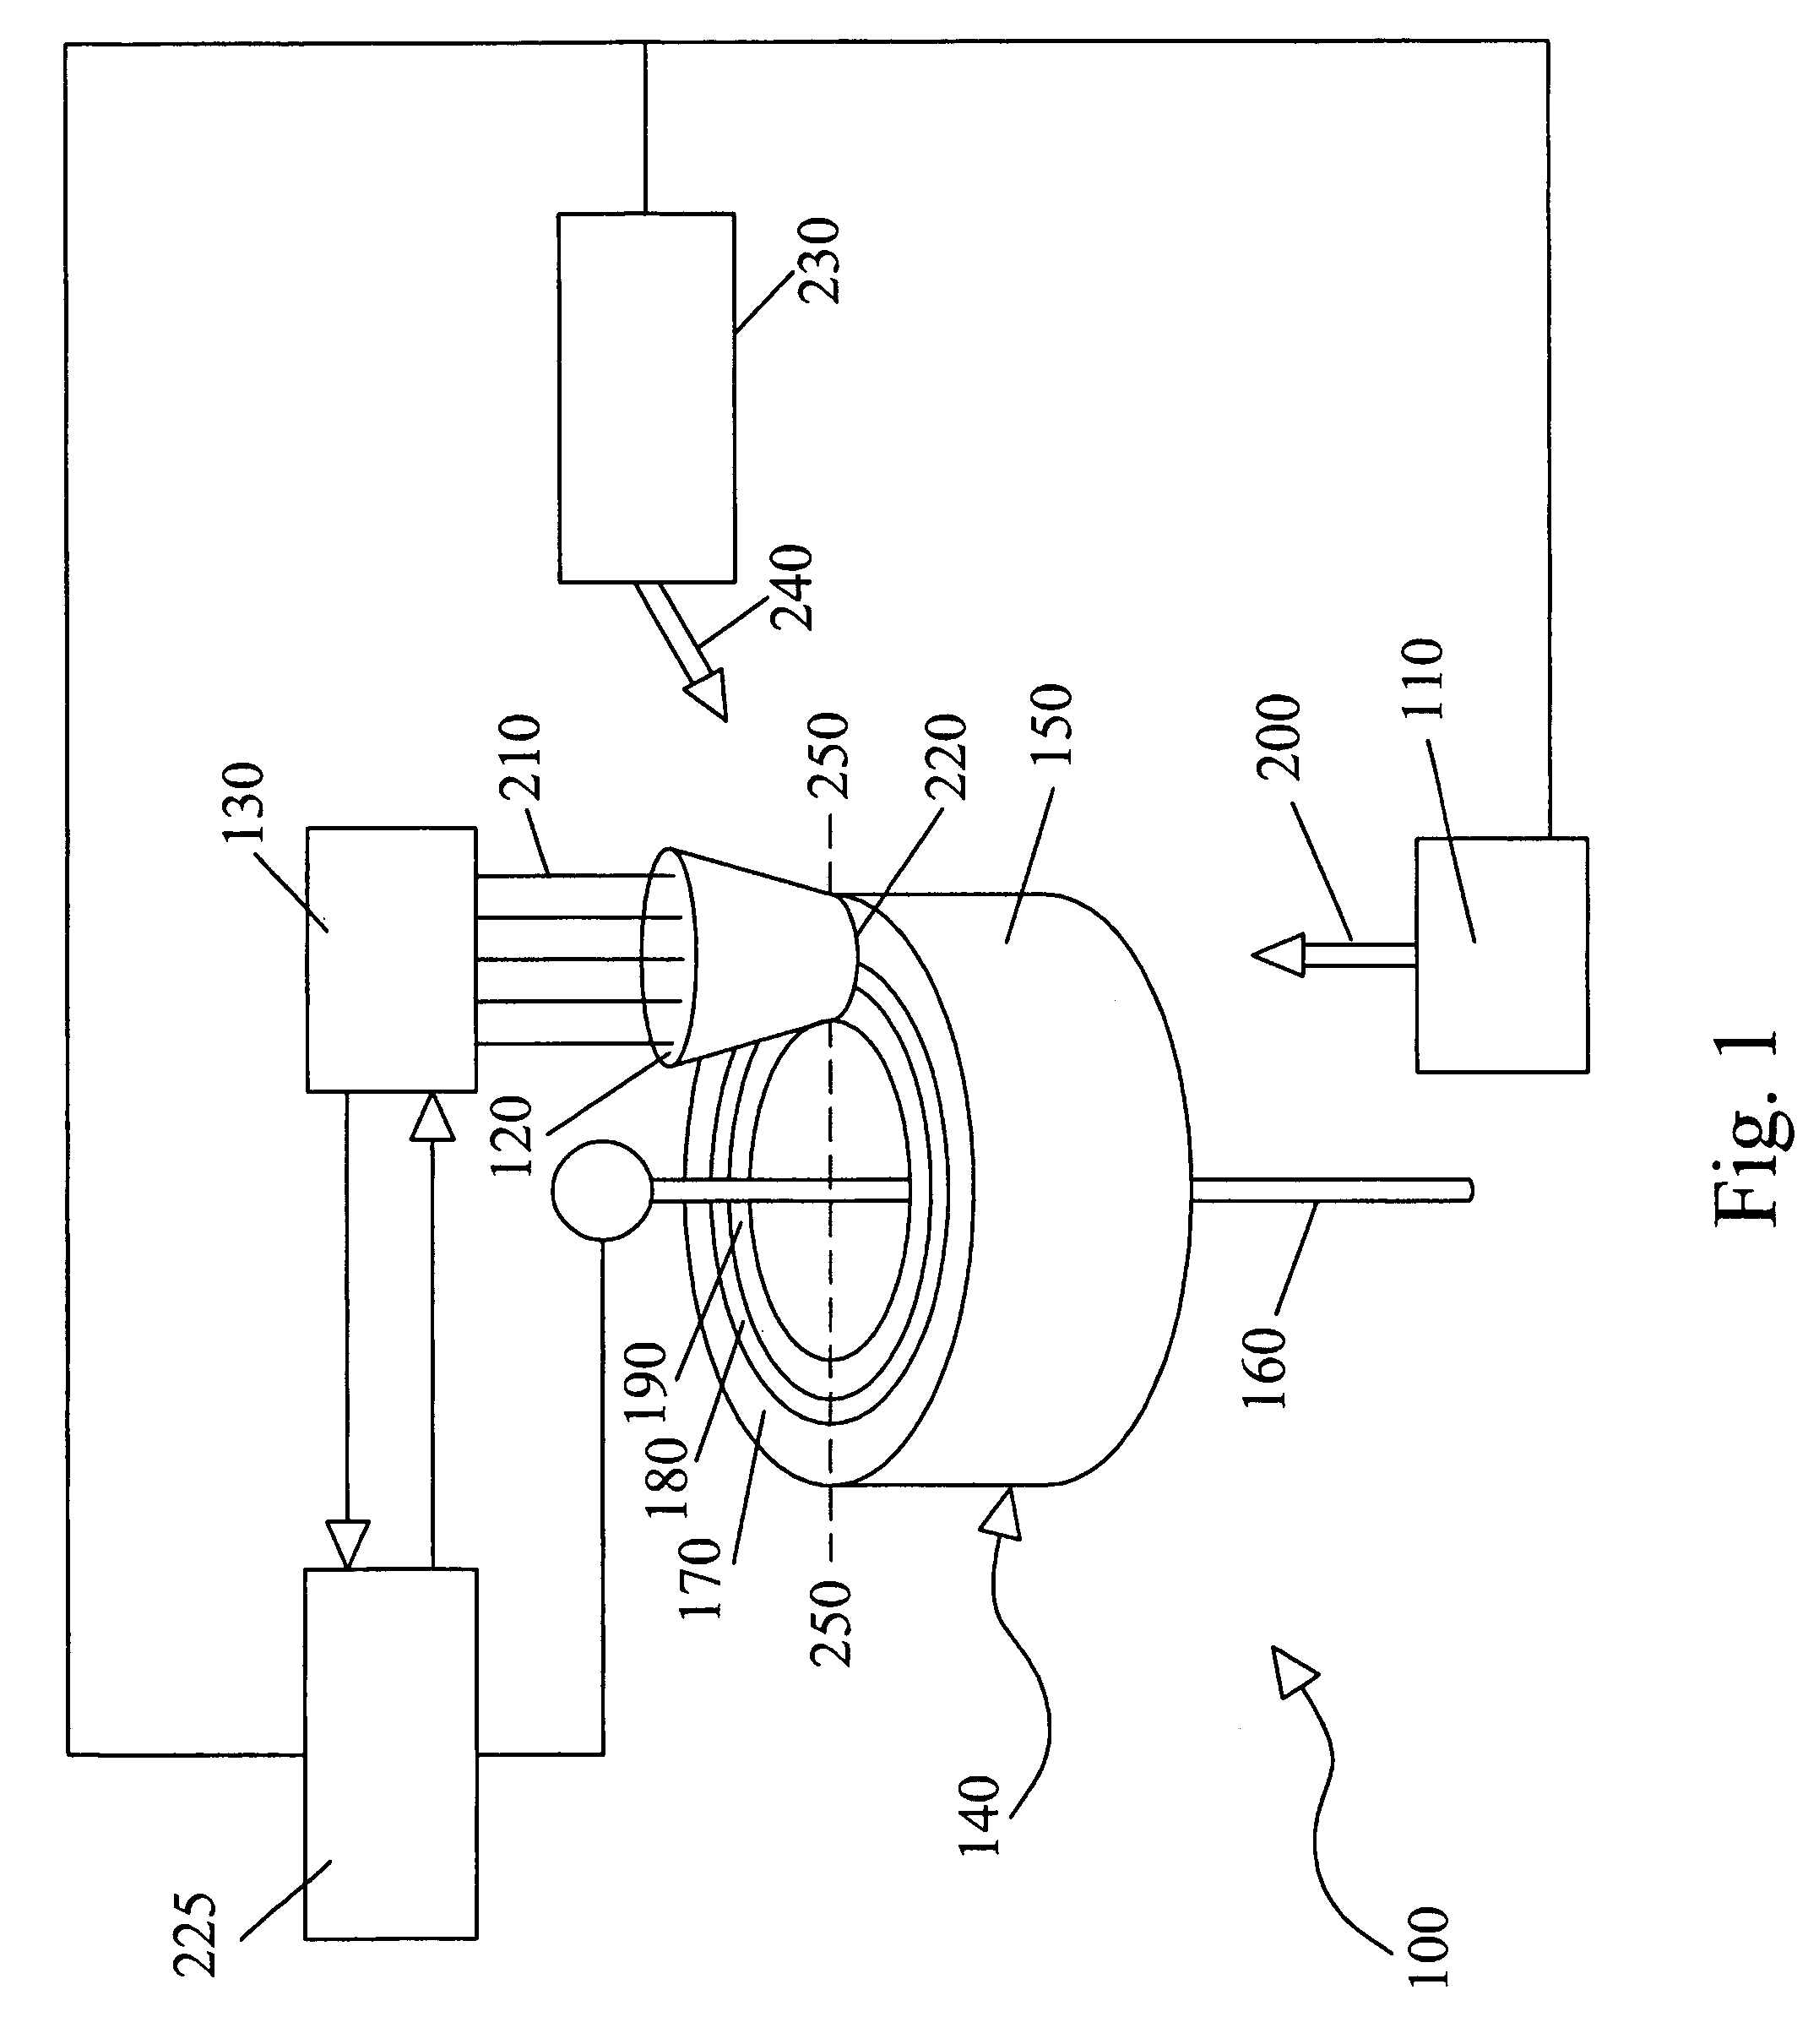 Monitoring and control system for blood processing